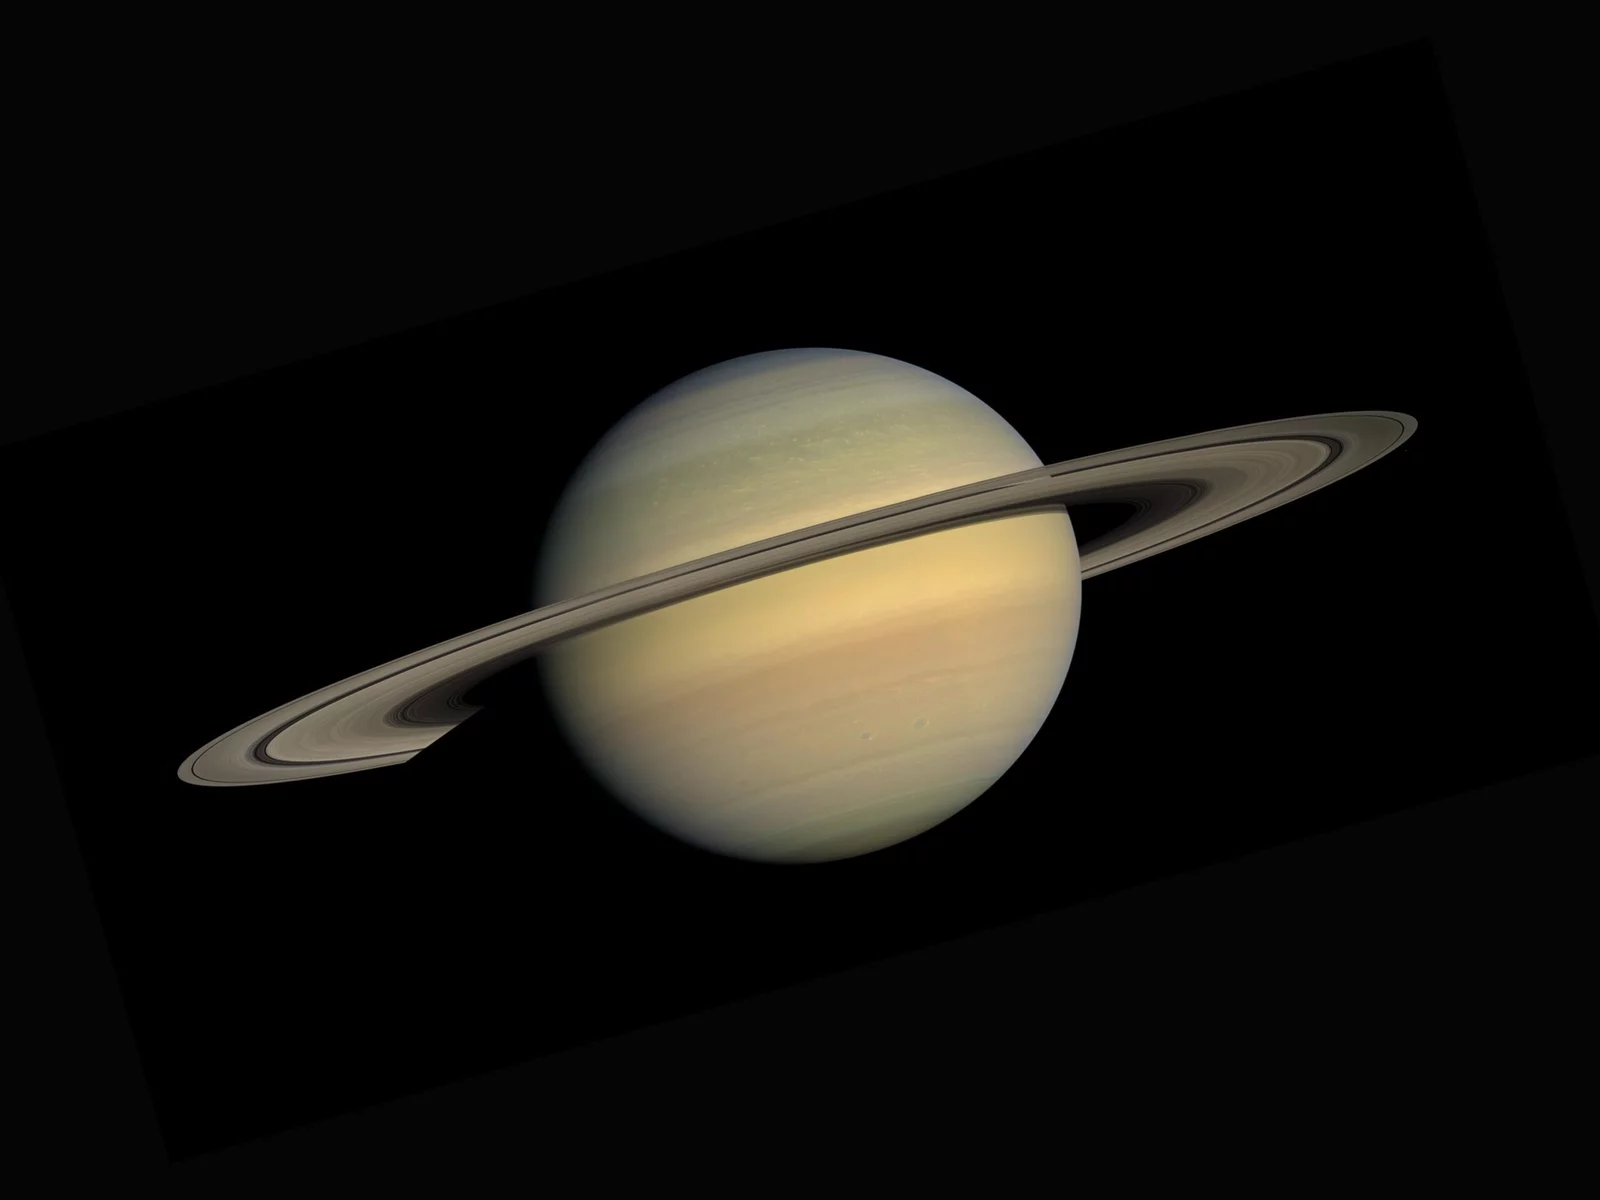 How Long Does It Take for Saturn to Orbit the Sun